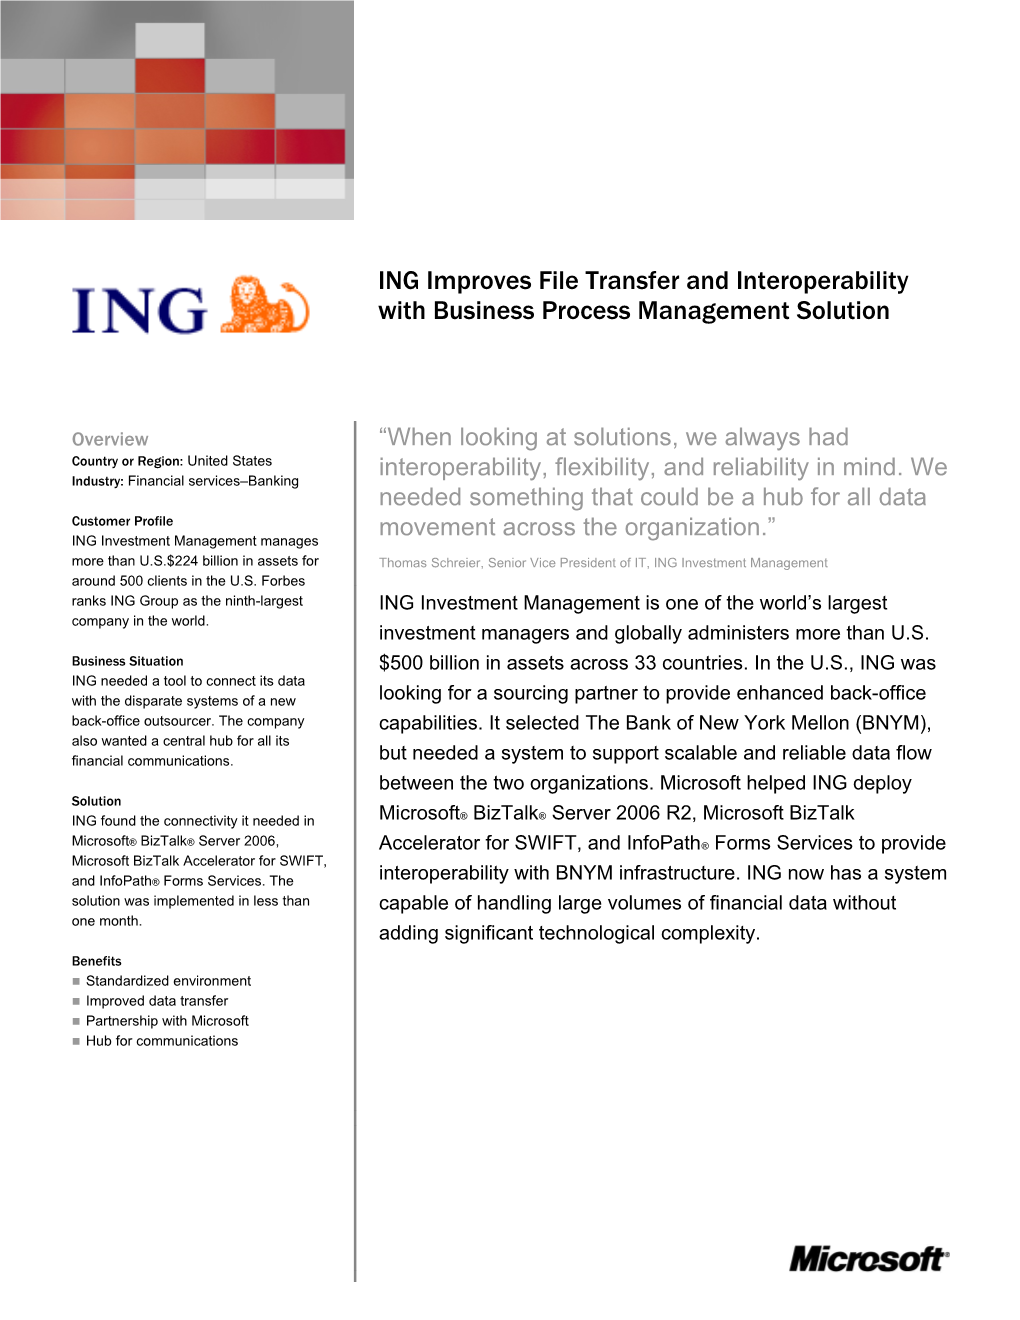 ING Has Systems Built on Microsoft Technologies, but BNYM Uses a Variety of In-House Technology